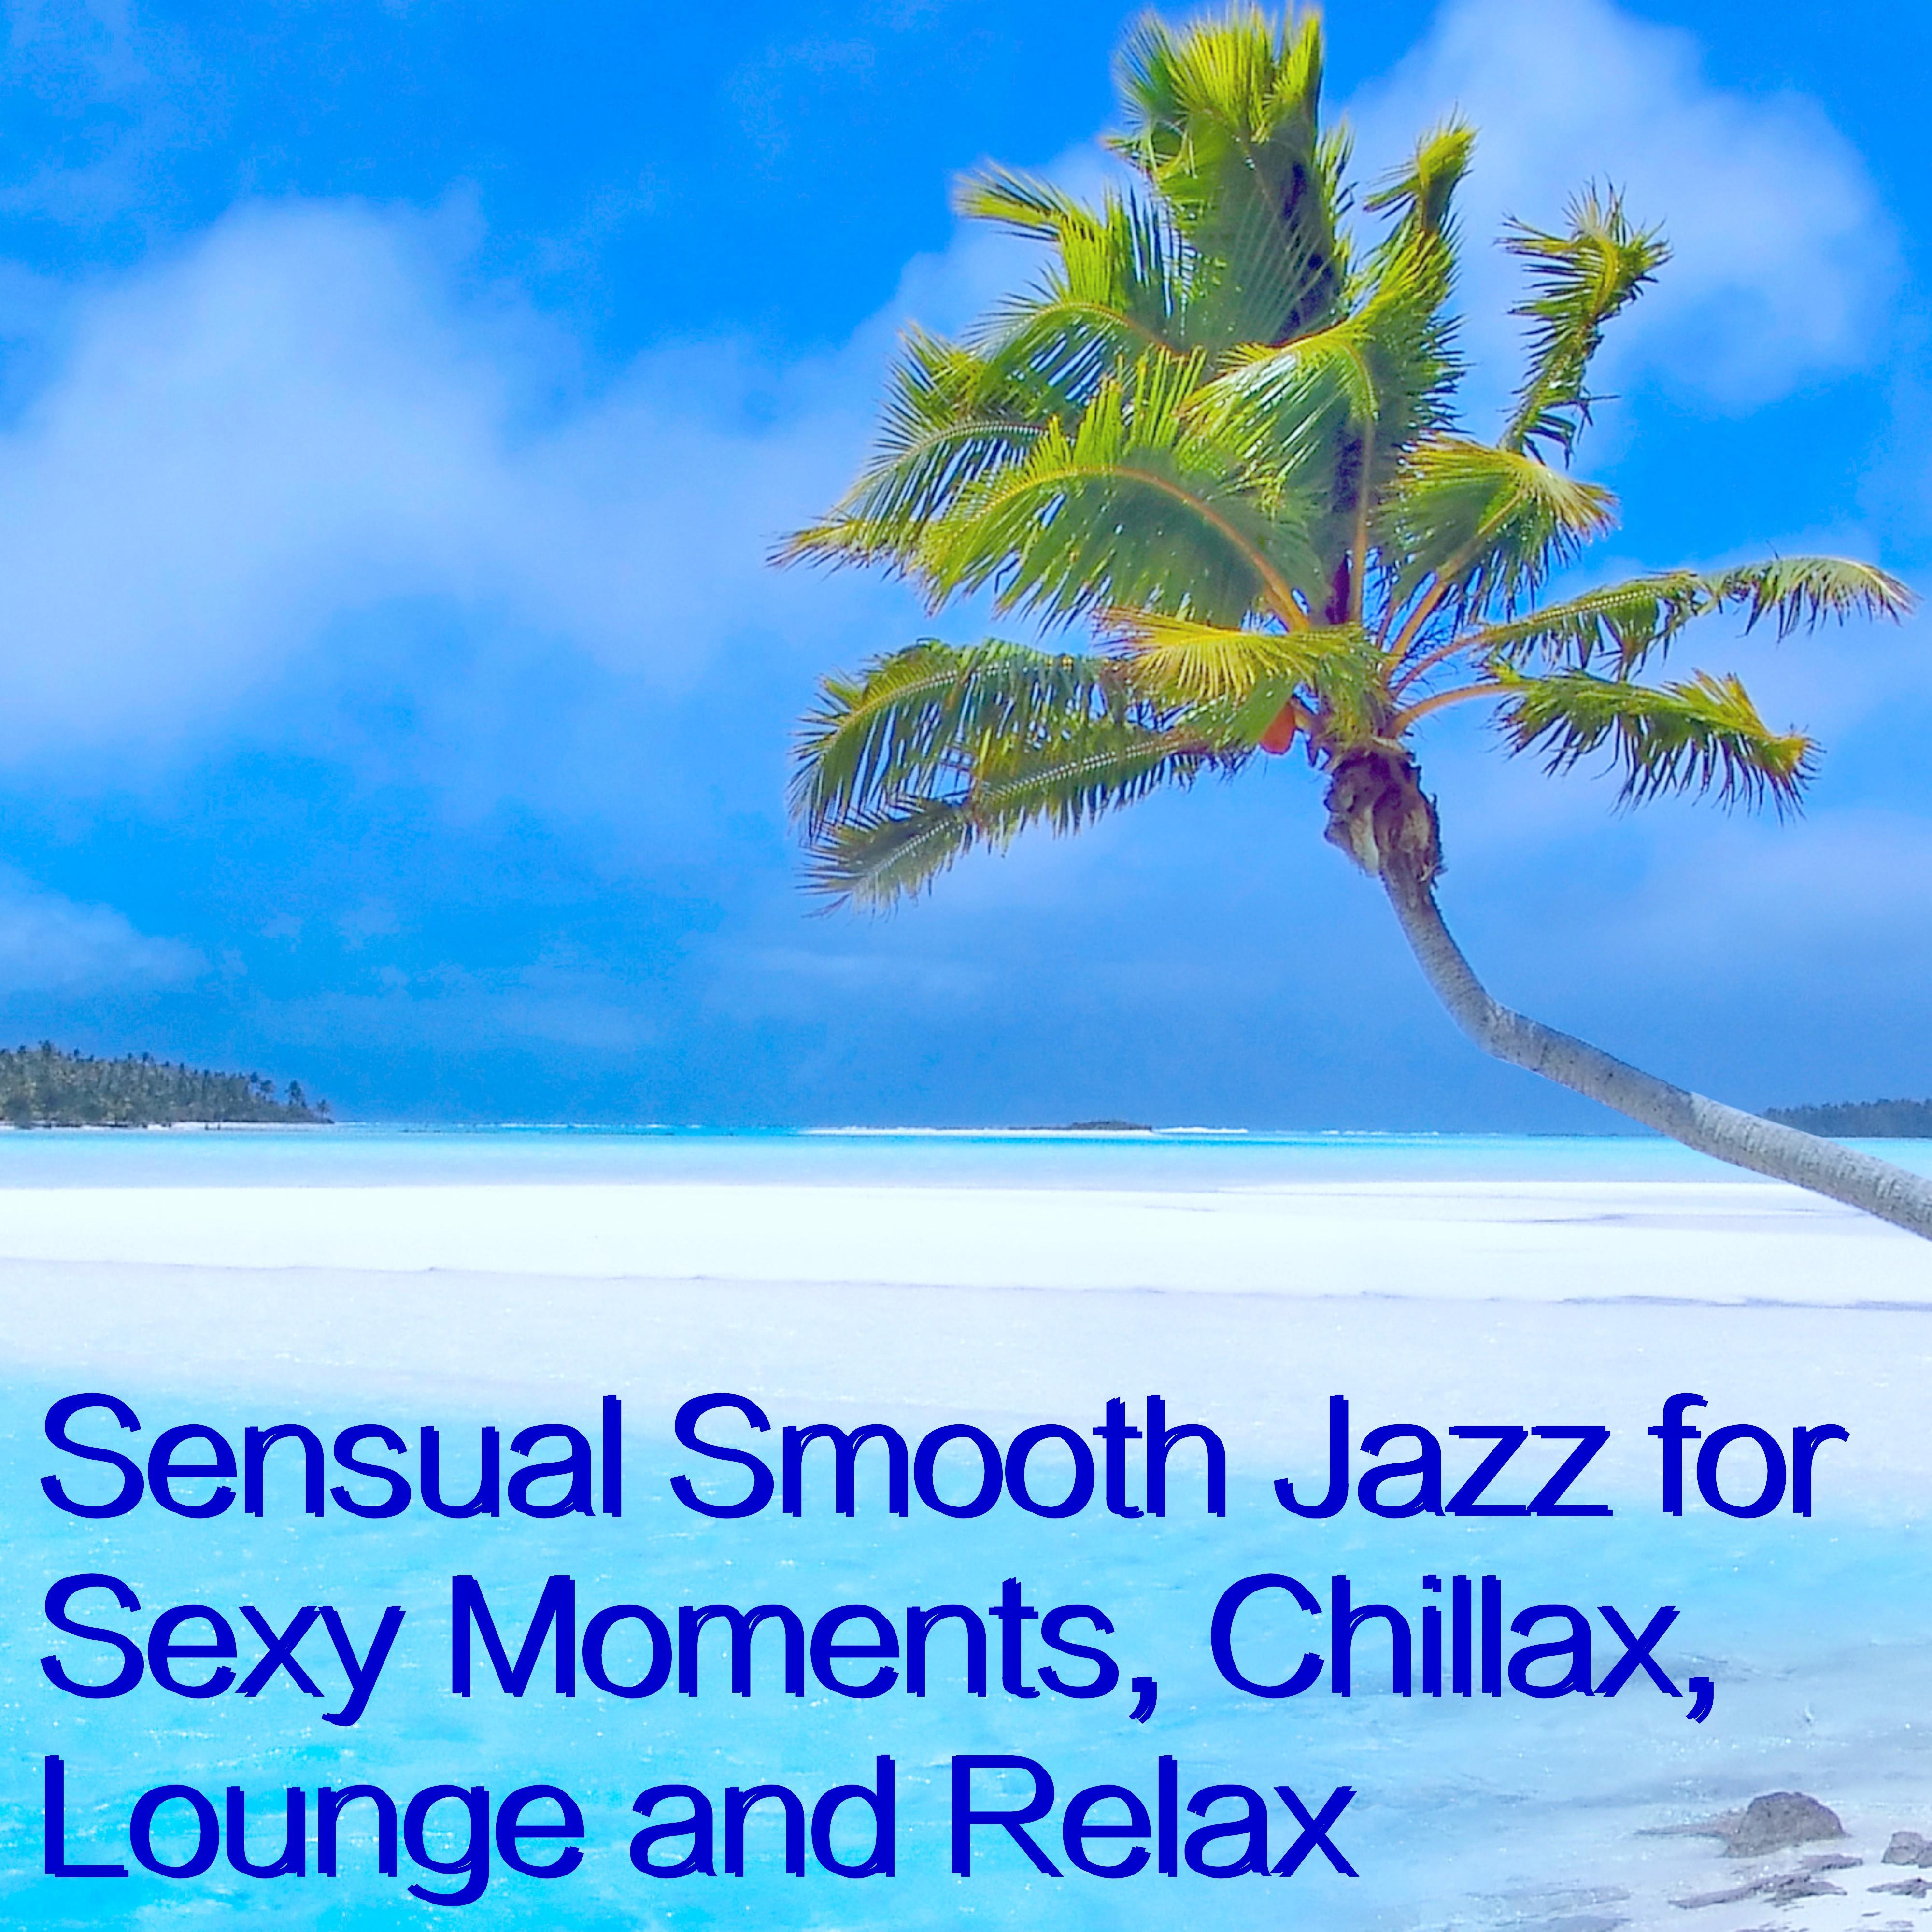 Sensual Smooth Jazz for Sexy Moments, Chillax, Lounge and Relax